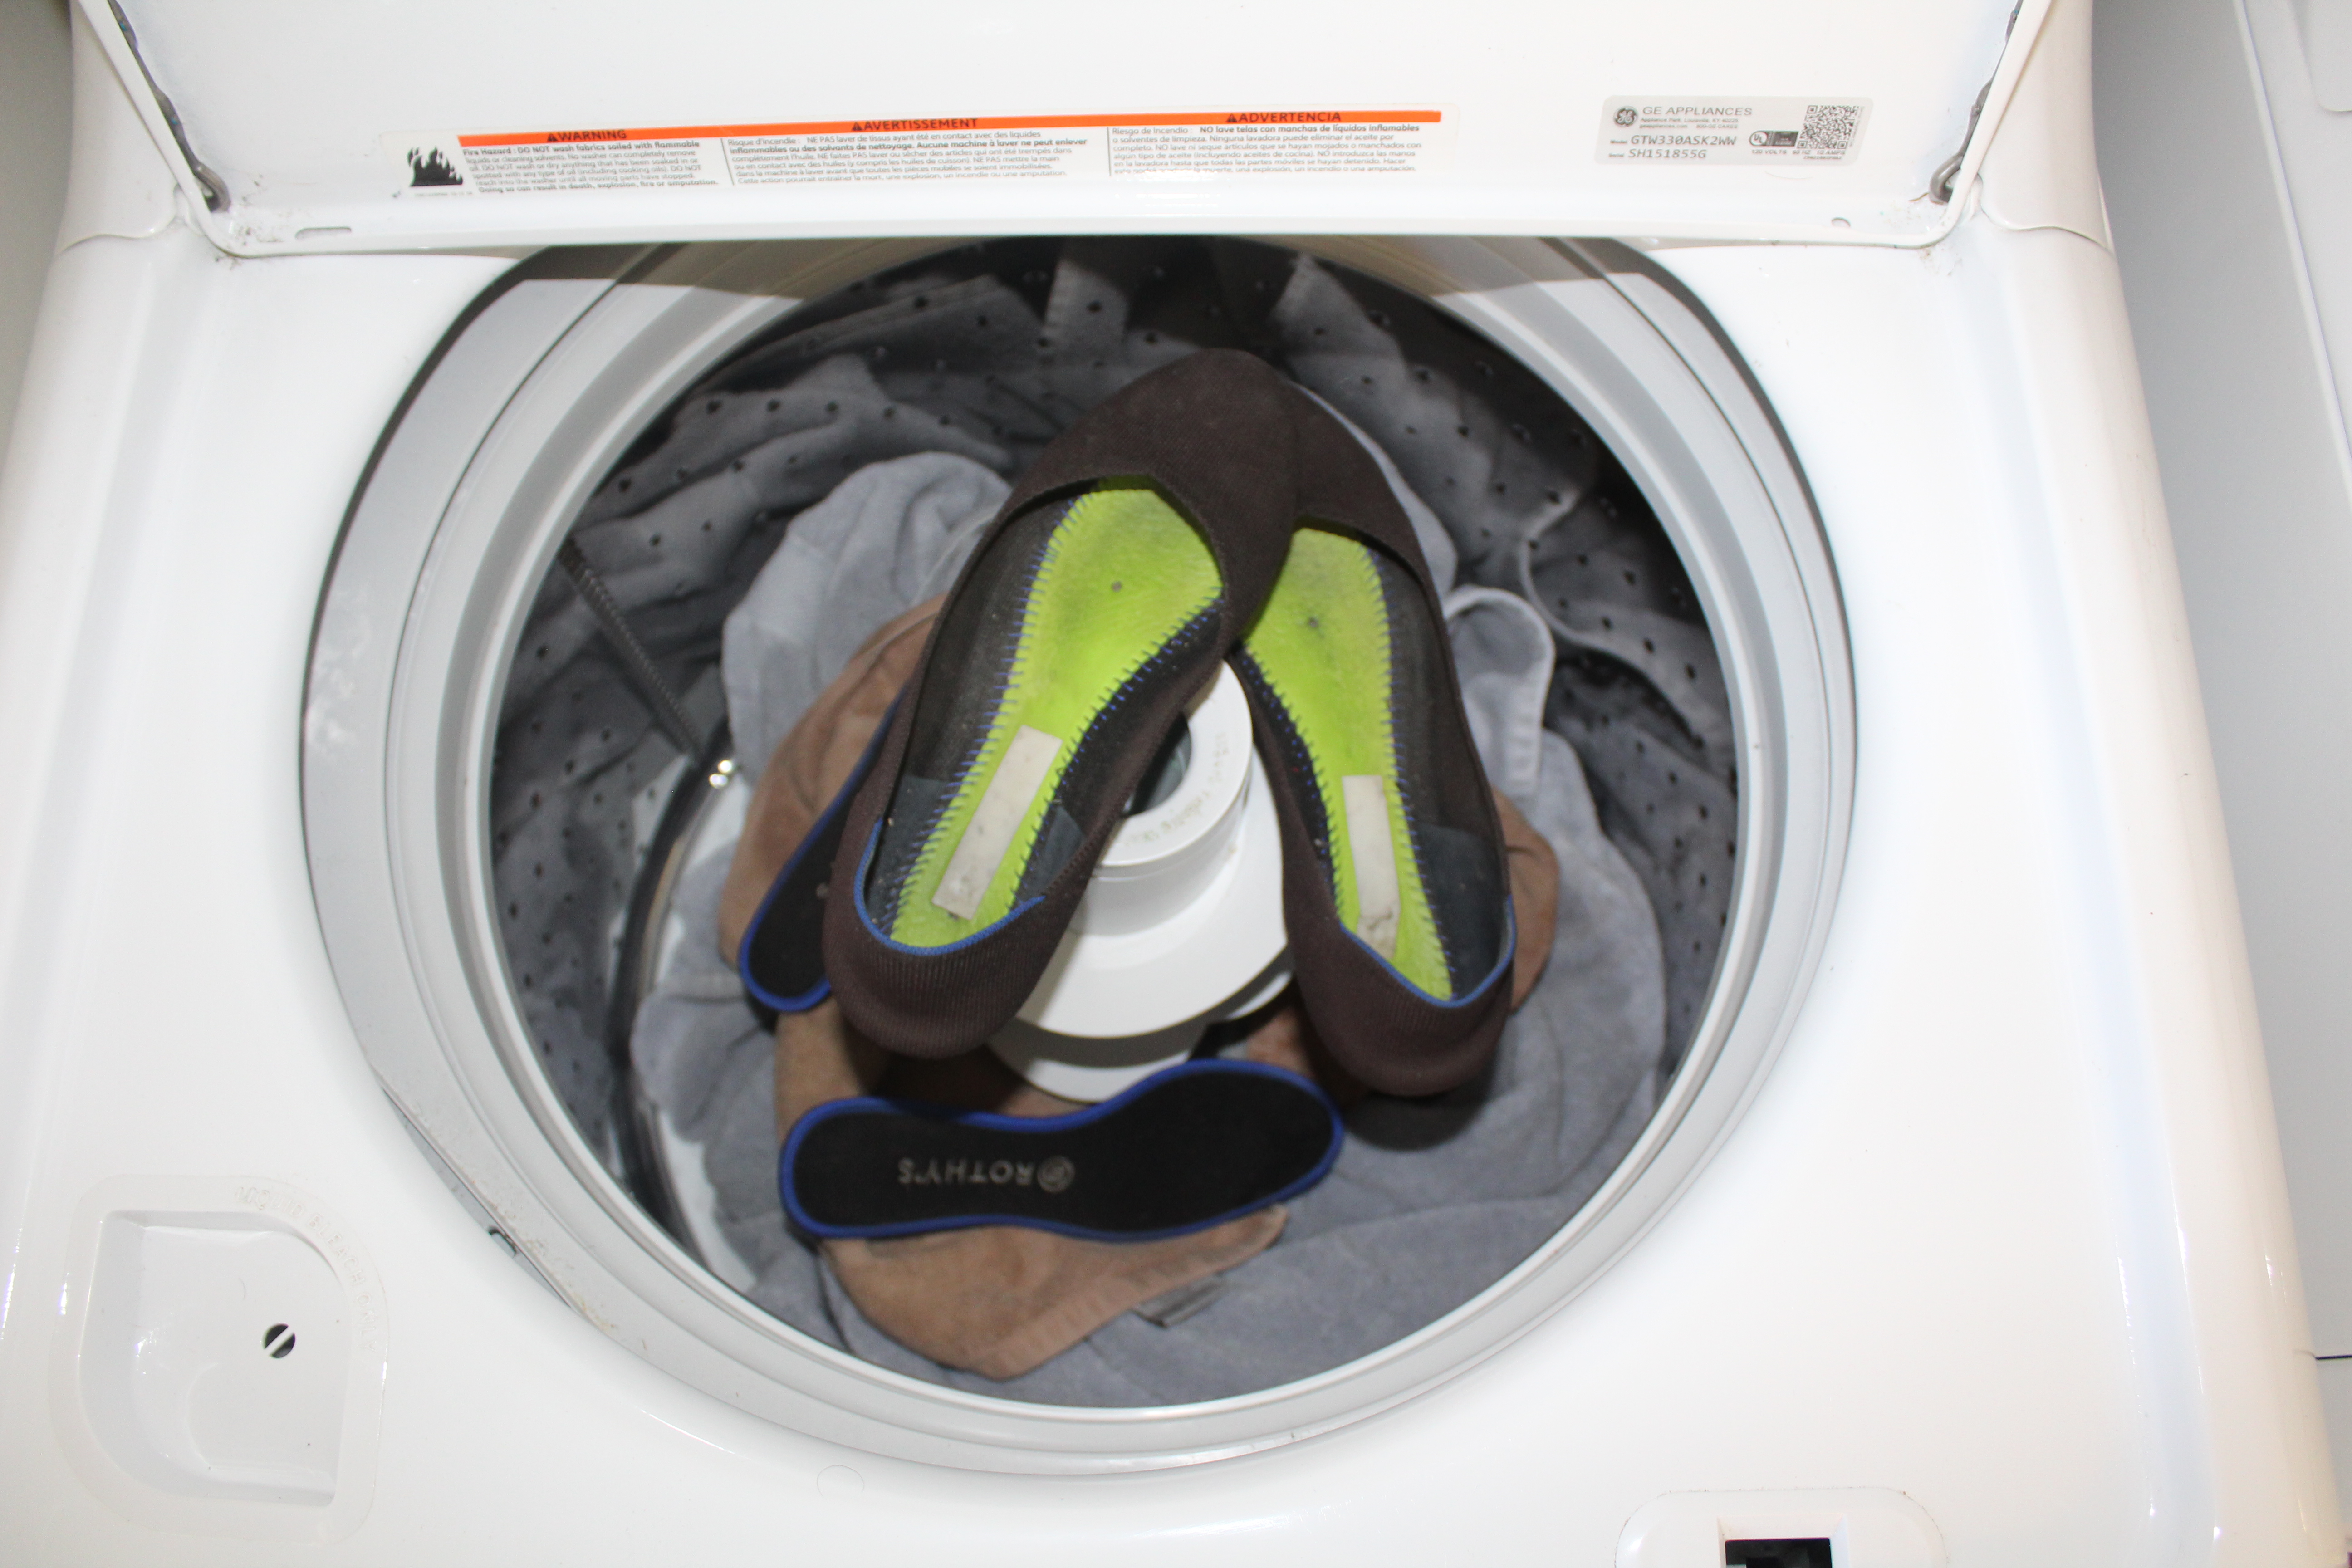 rothys in a washing machine with bath towels